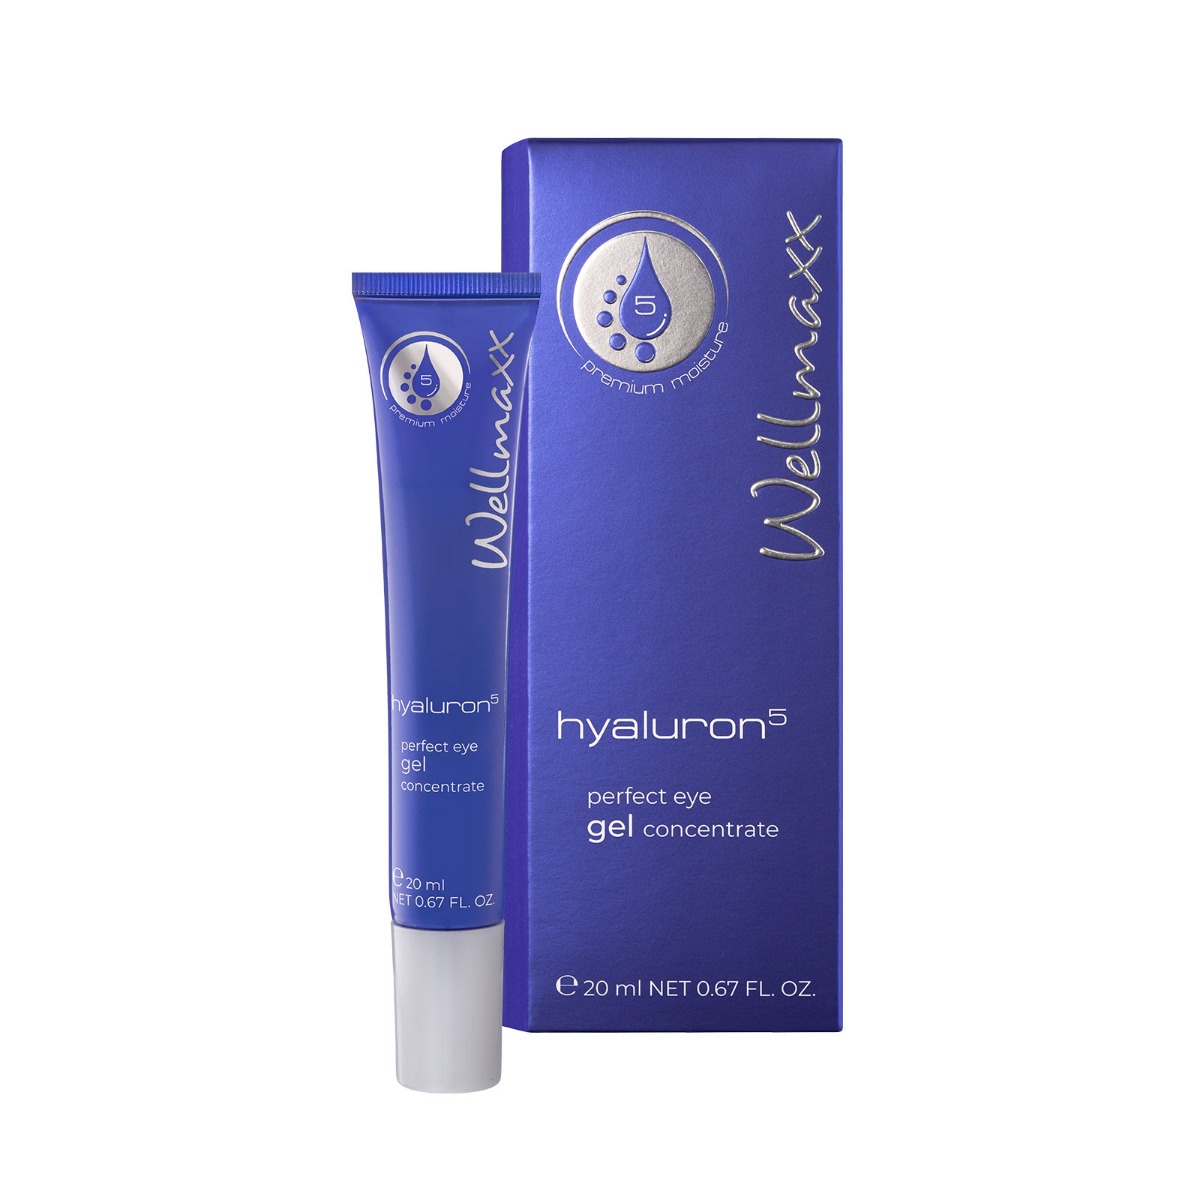 hyaluron⁵ perfect eye gel concentrate